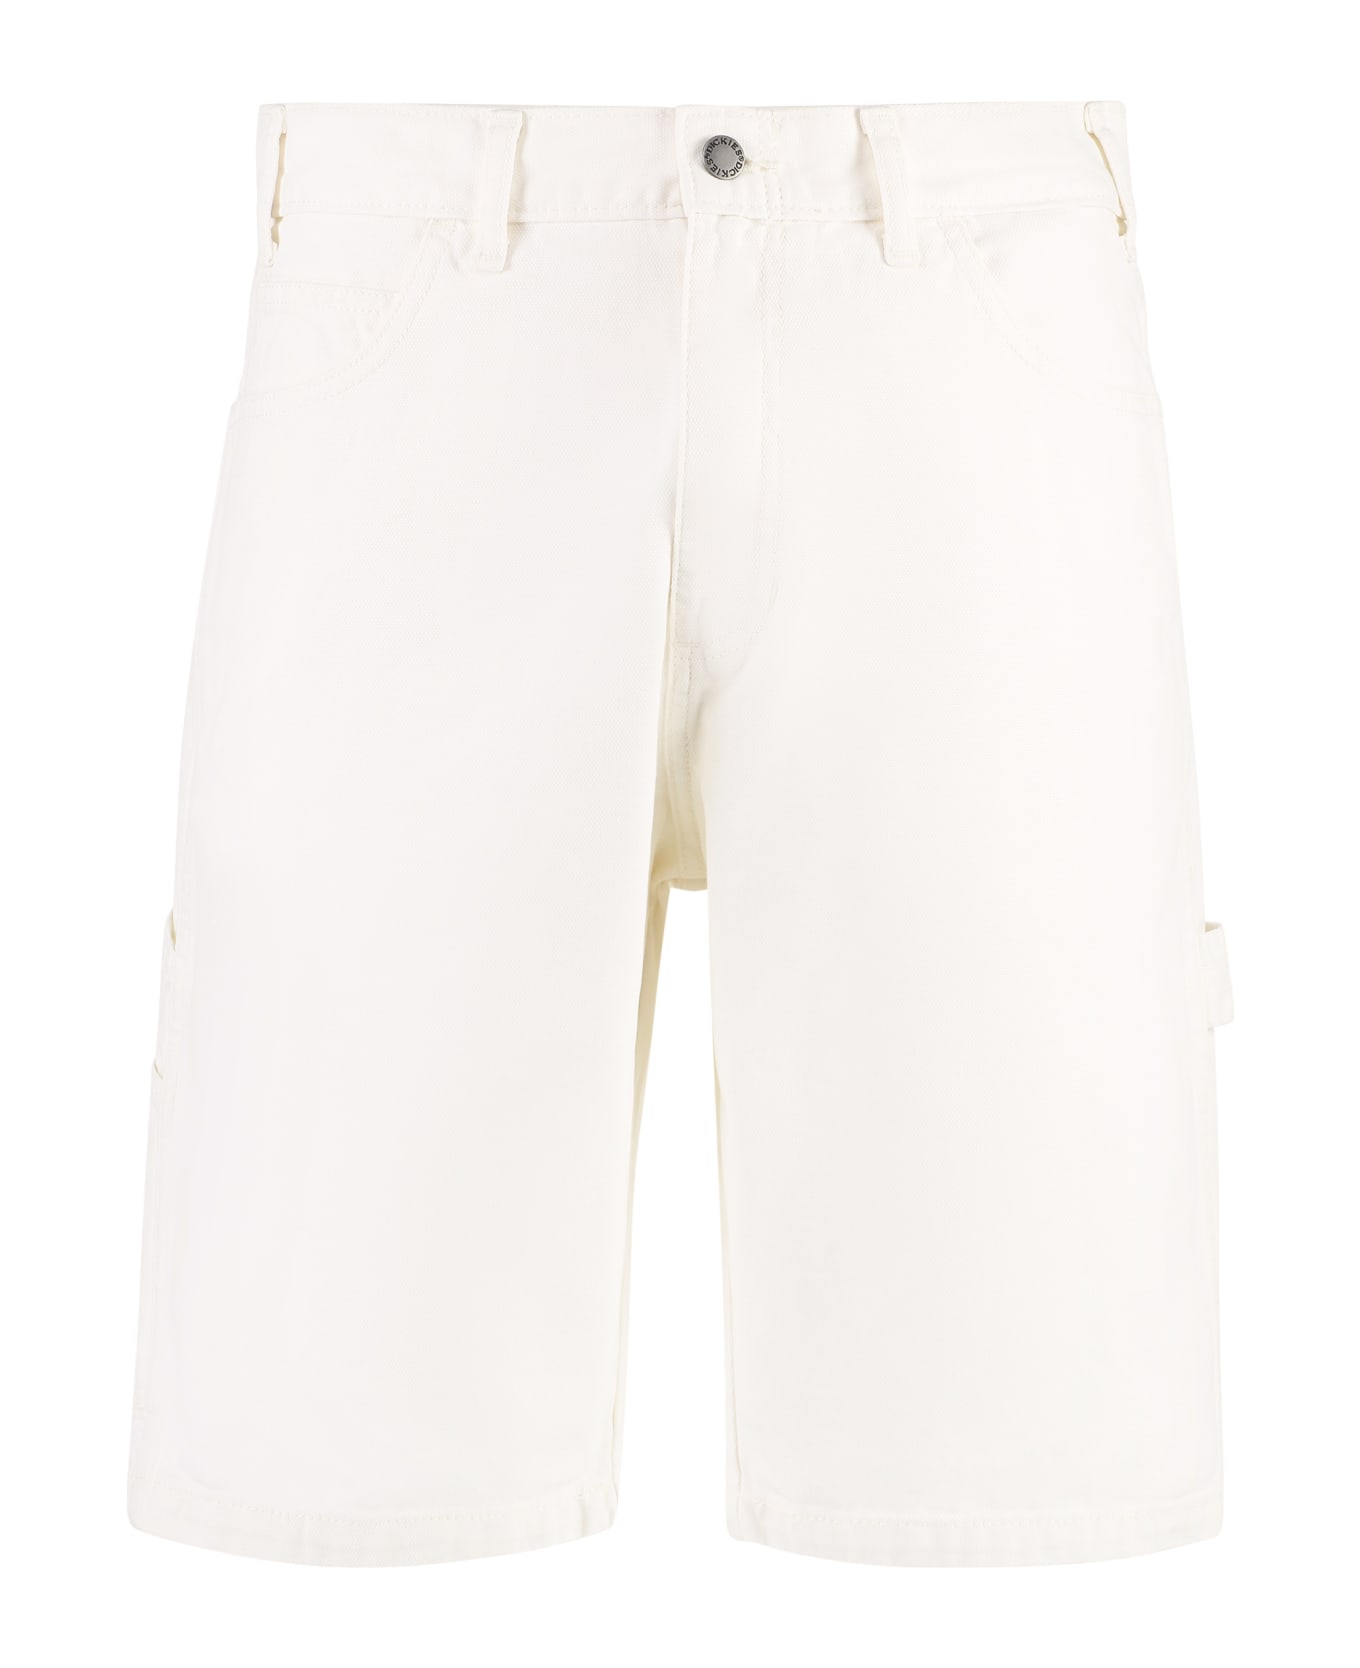 Dickies Duck Cotton Shorts - White